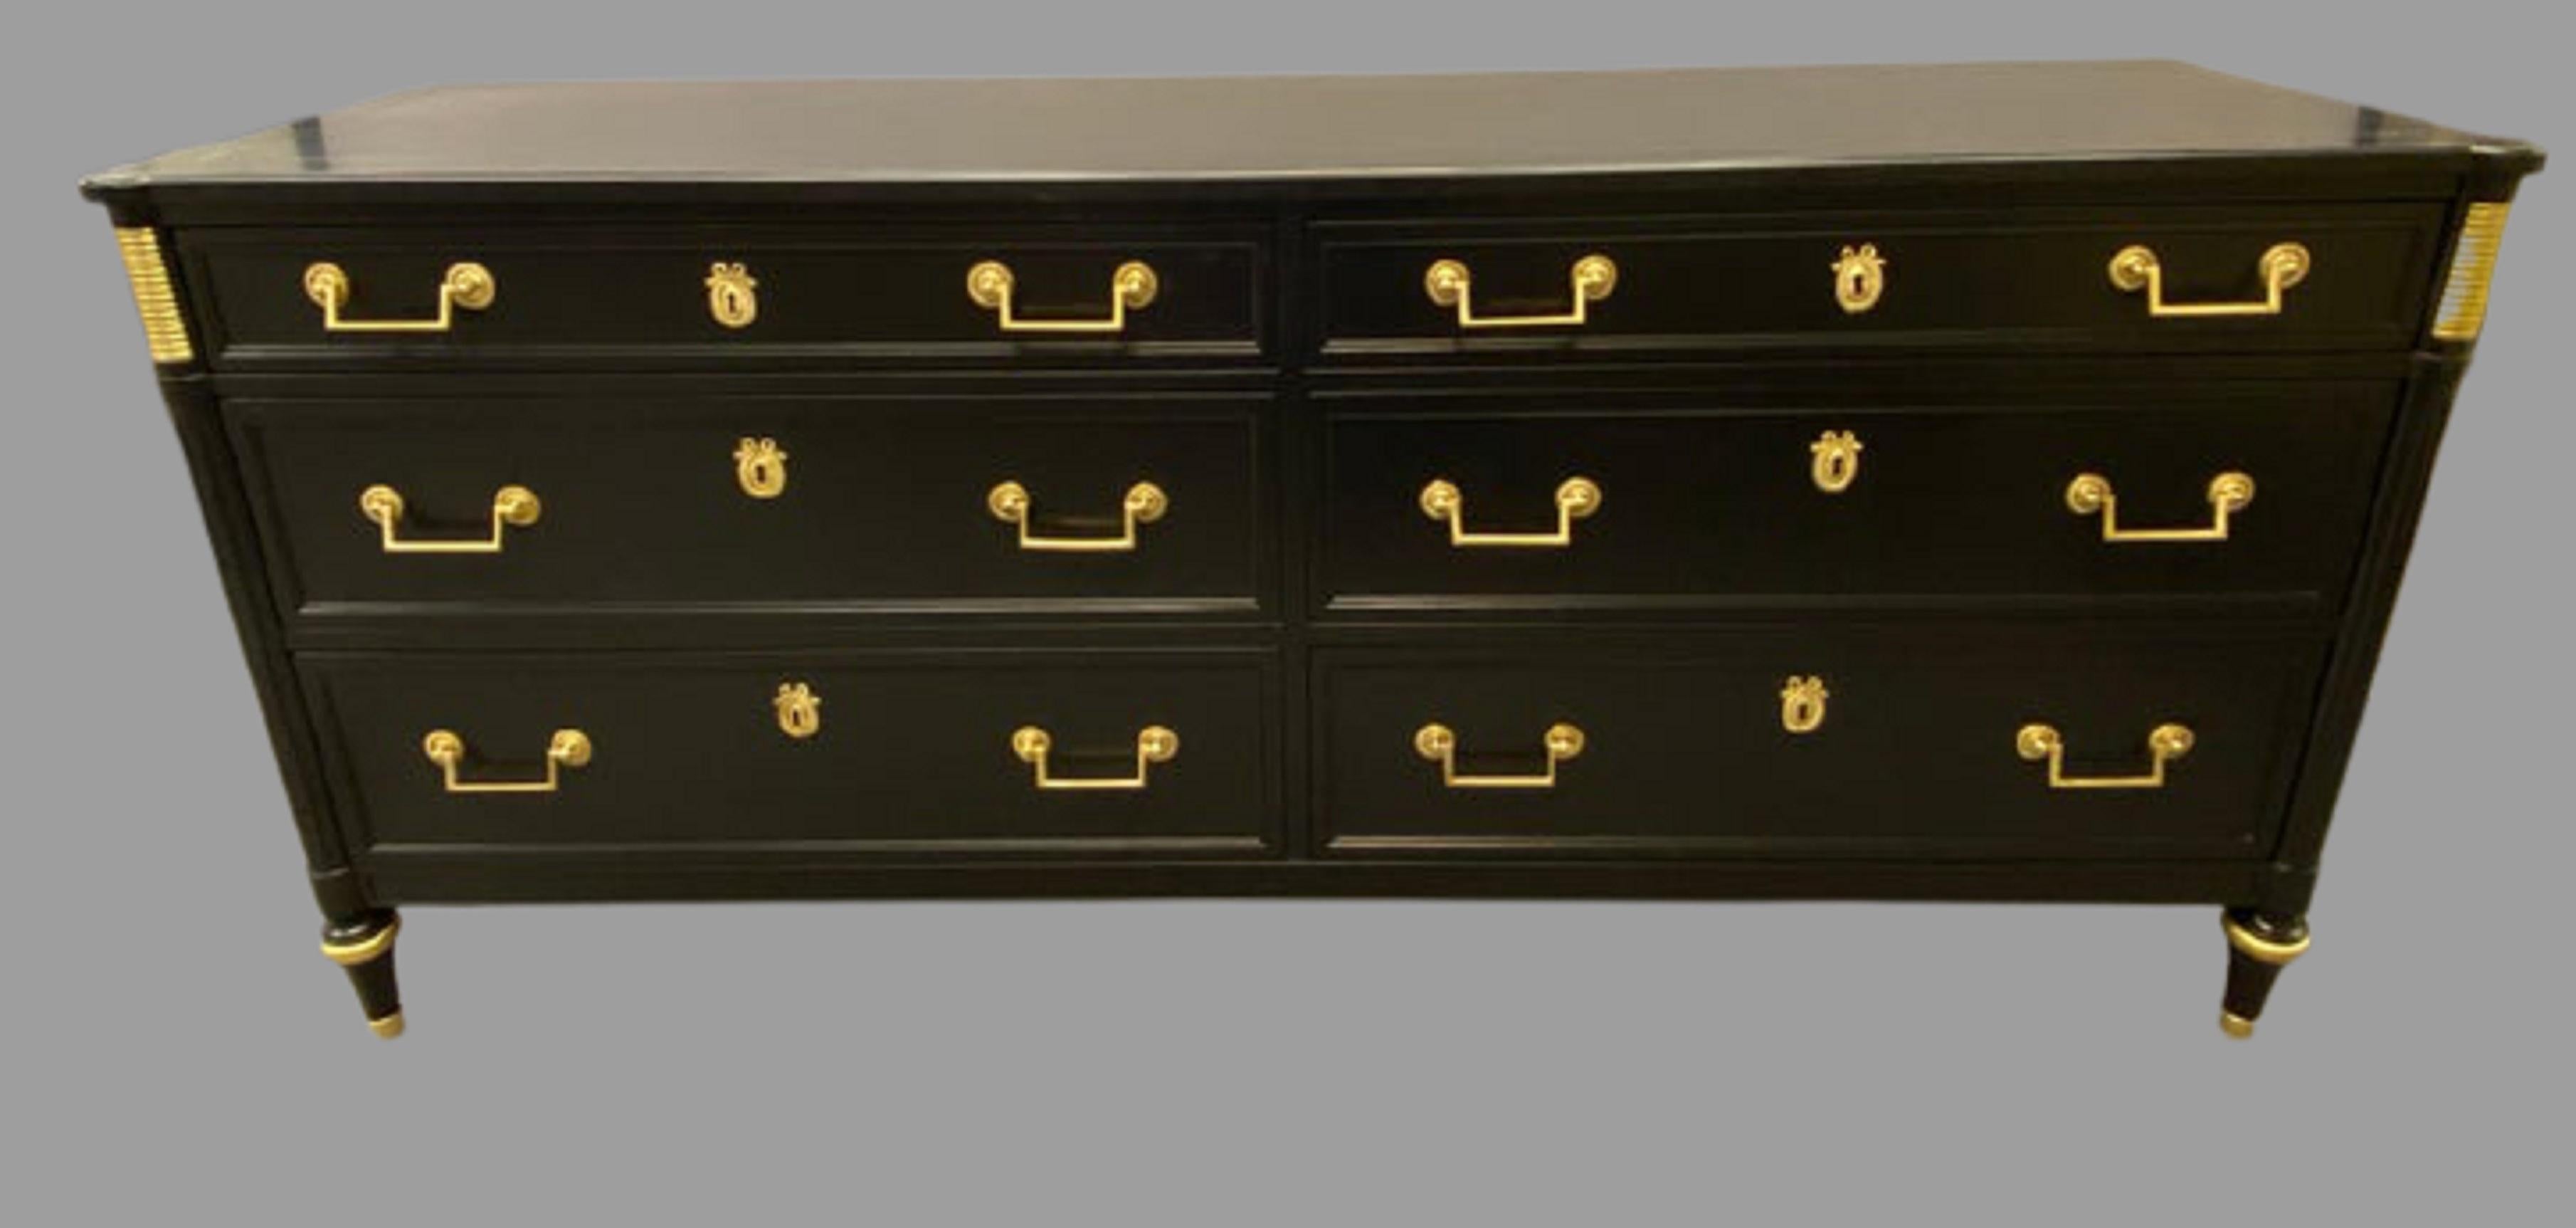 Maison Jansen Style Ebonized Double Dresser. A Hollywood Regency ebony and gilt metal mounted six drawer side by side commode dresser recently refinished. The whole supported by bronze capped and sabot legs.